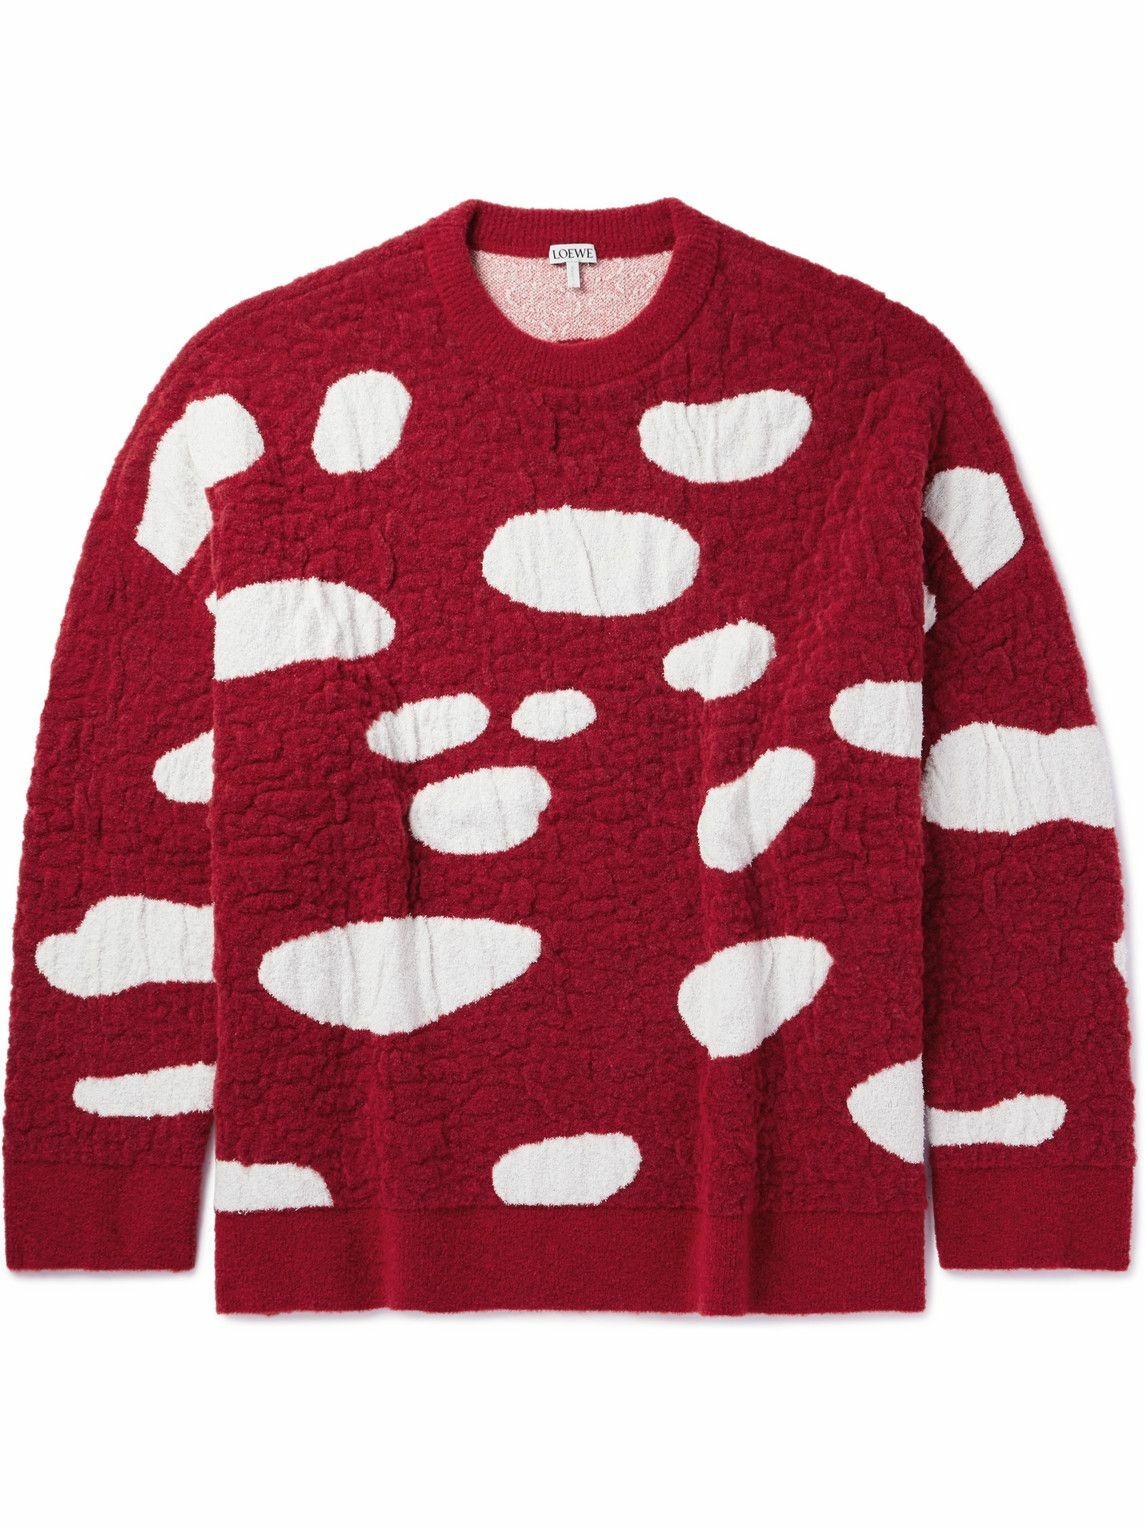 Loewe ‘Right On Time’ Wool Knit Sweater